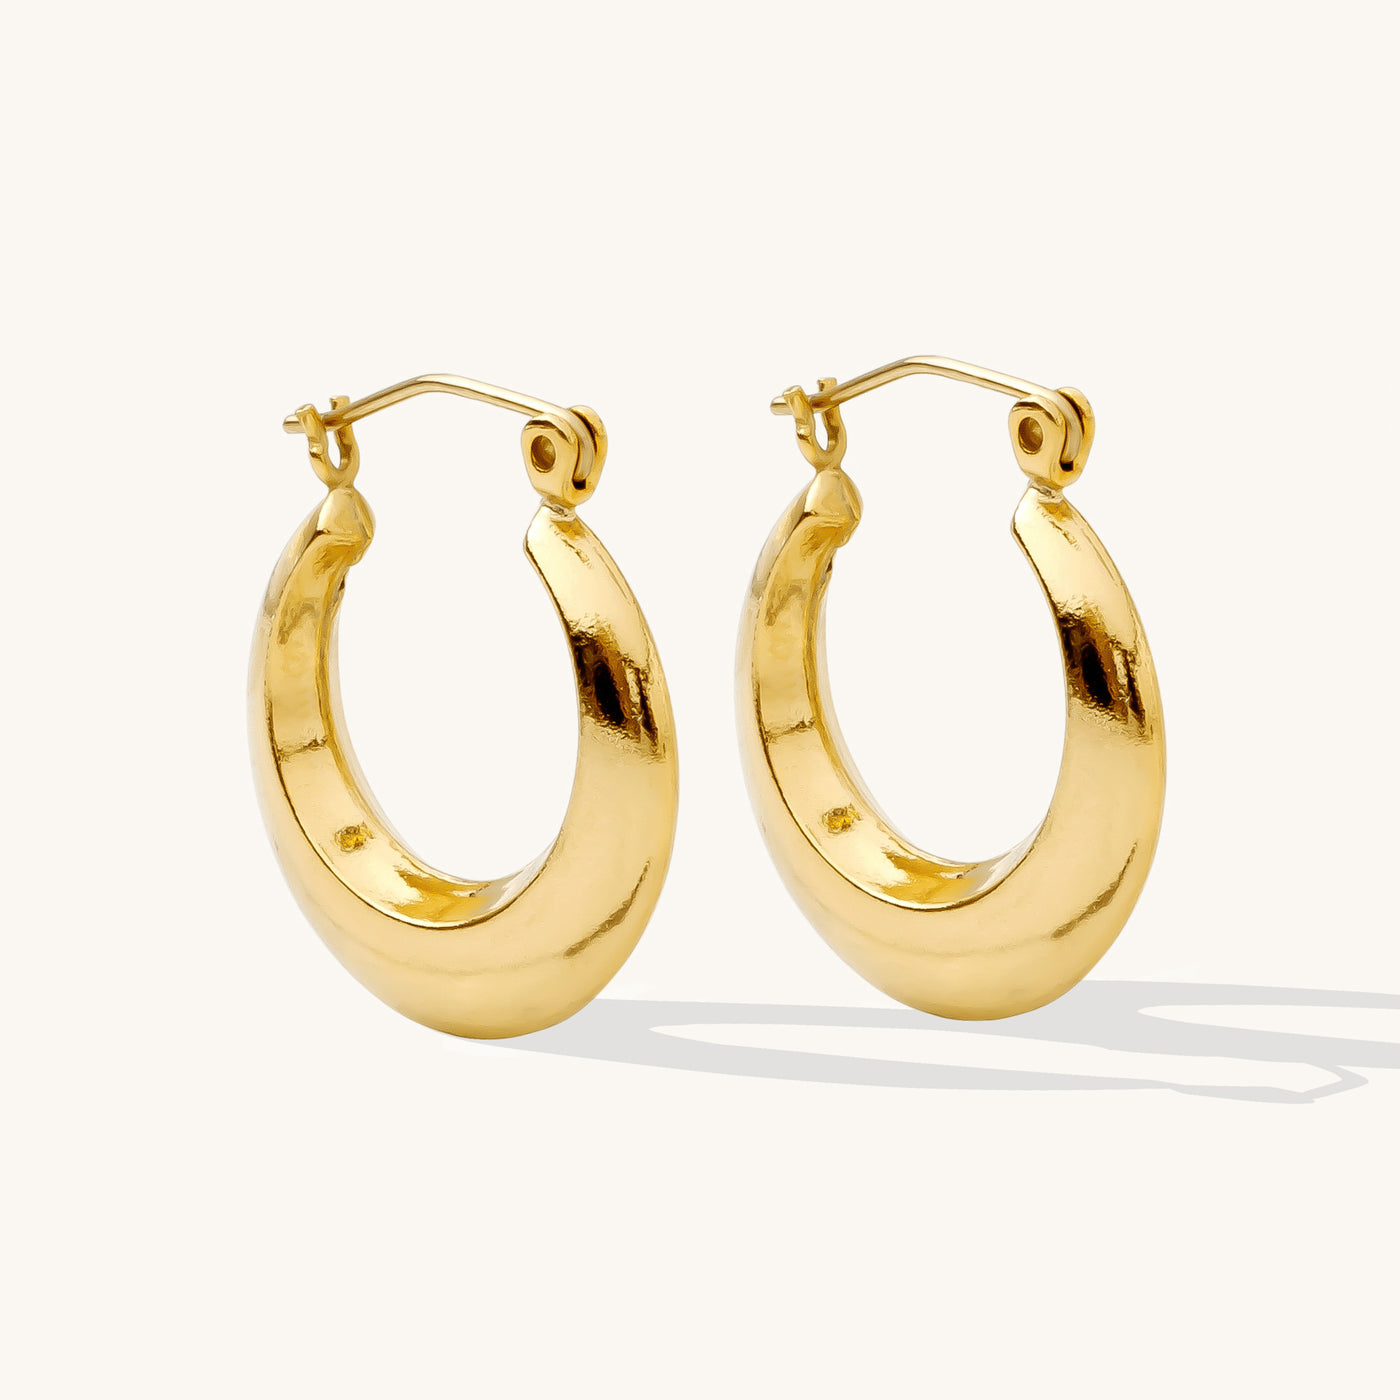 Simple Light Weight Gold Earring Design / Daily Wear Gold Earring Design | Gold  earrings studs simple, Gold earrings for women, Gold earrings with price